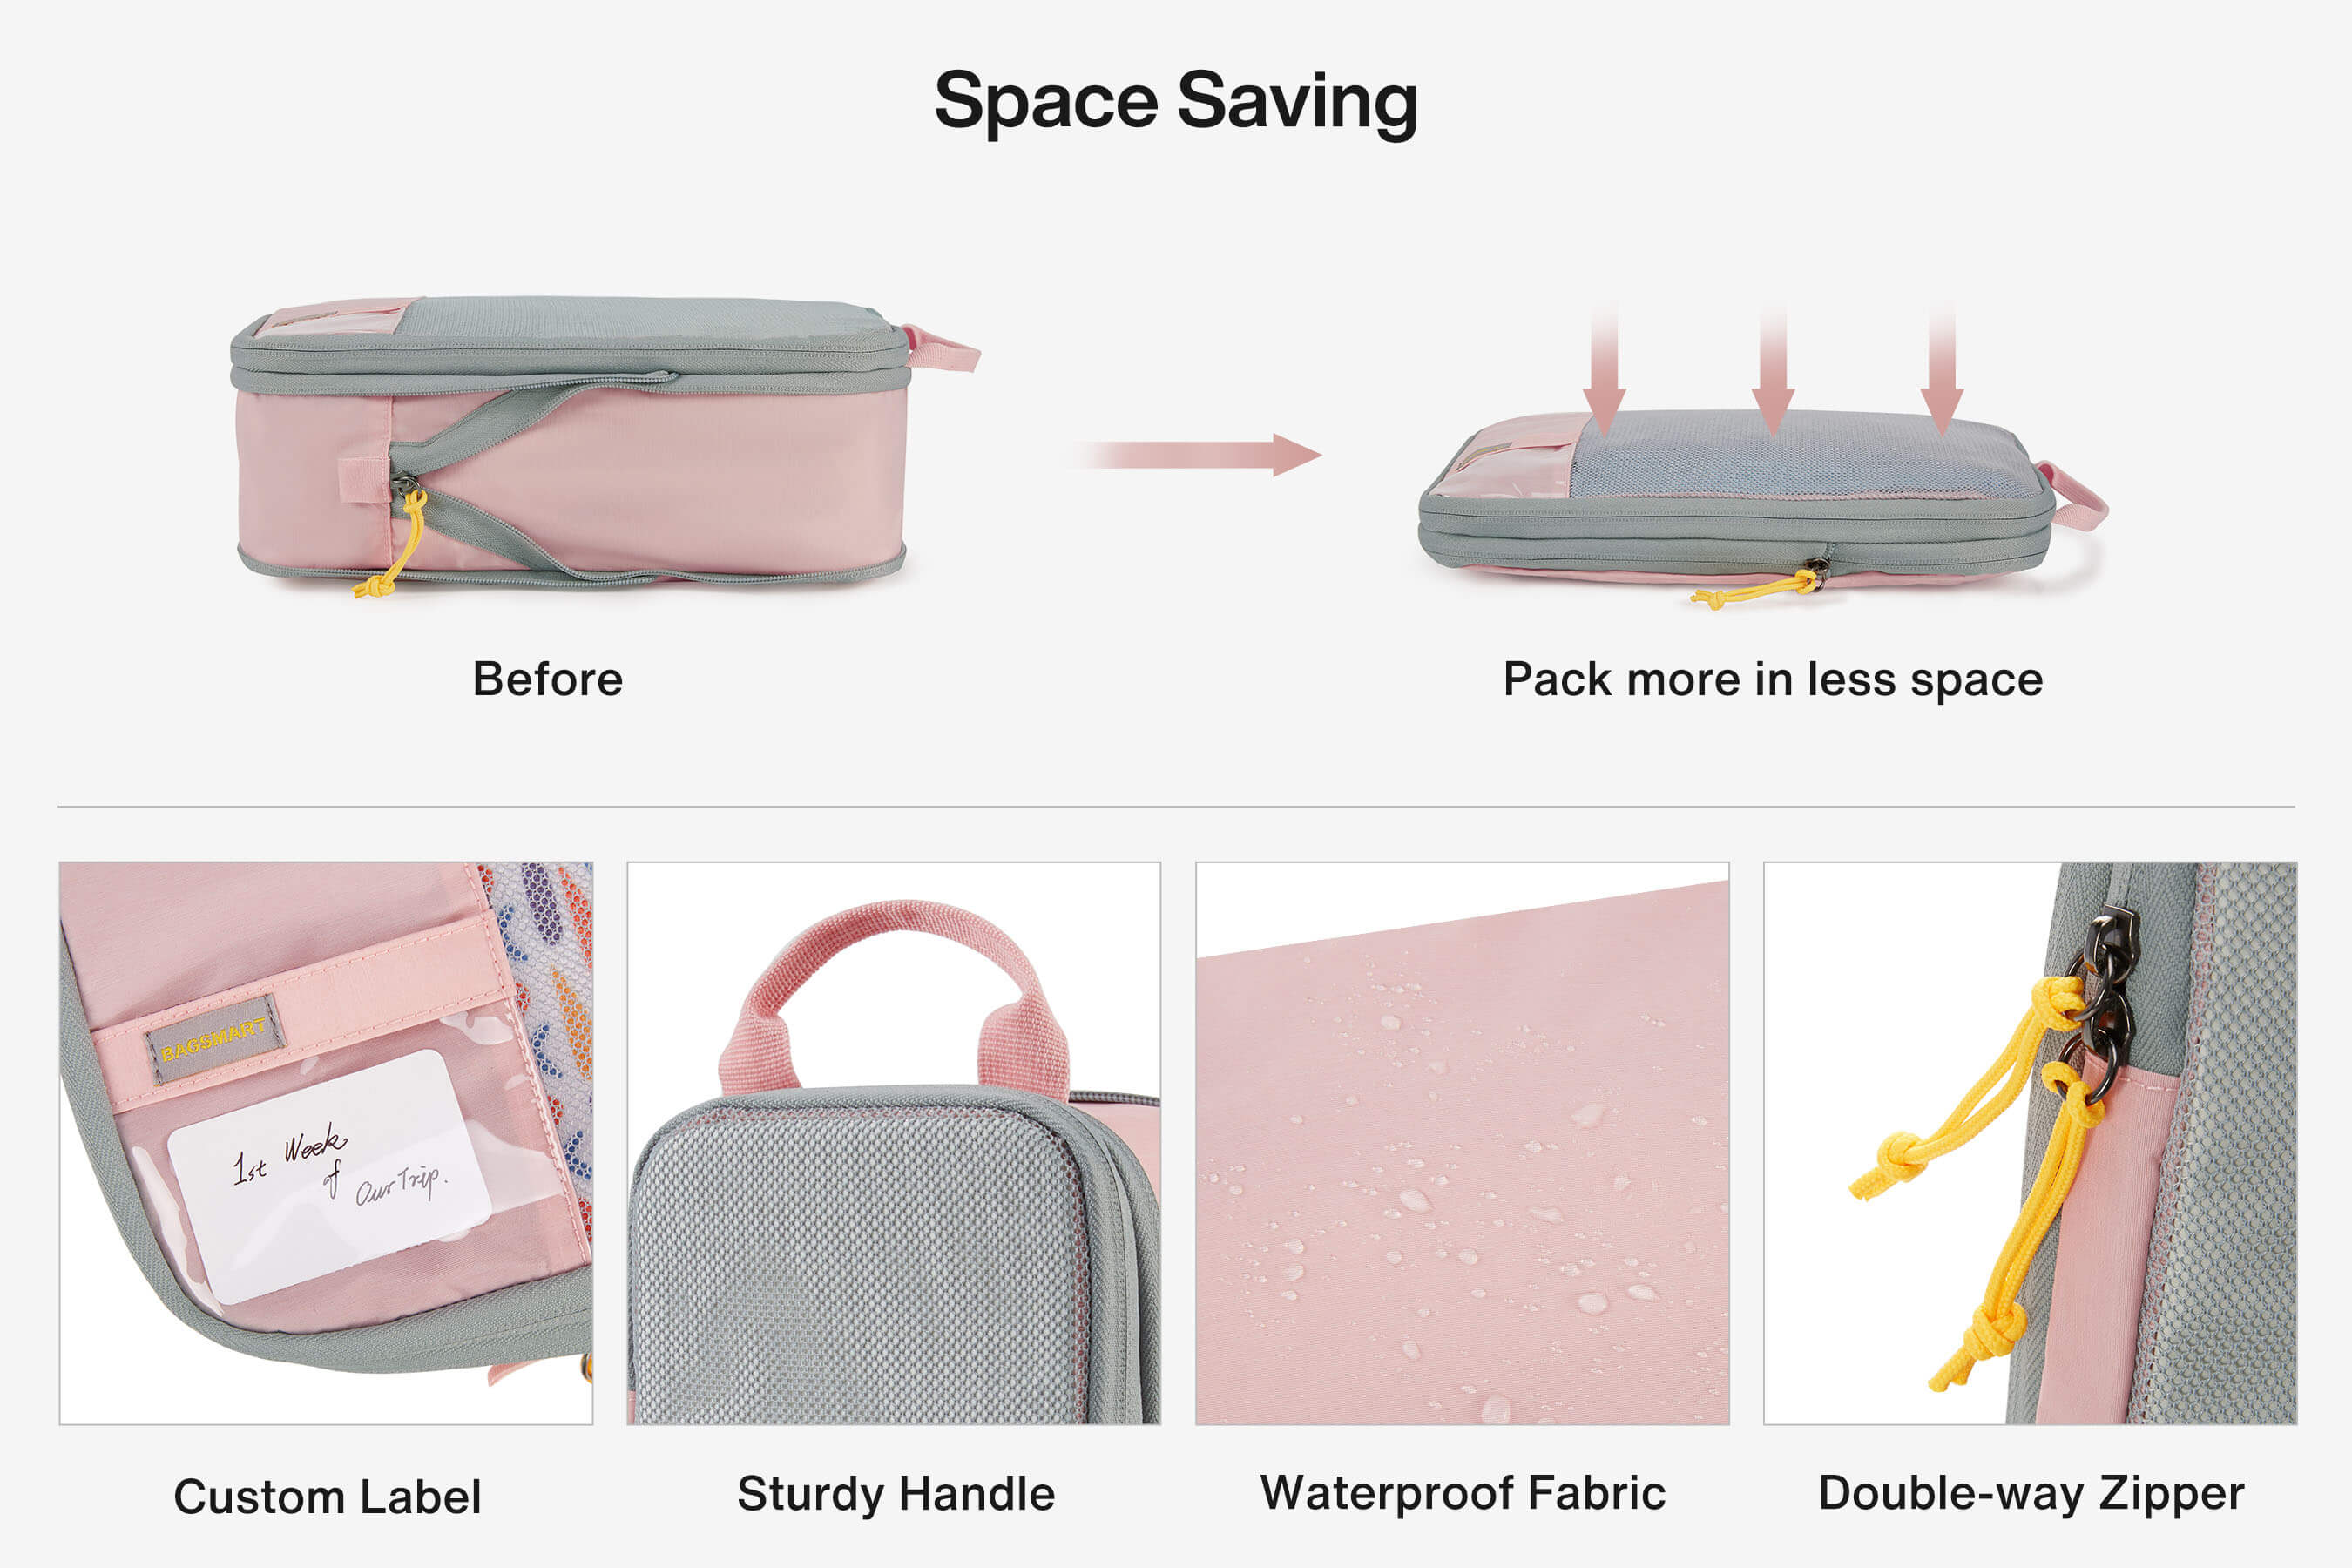 Bagsmart Travel Packing Cubes Keep Clothes Neat and Wrinkle-Free During Transit